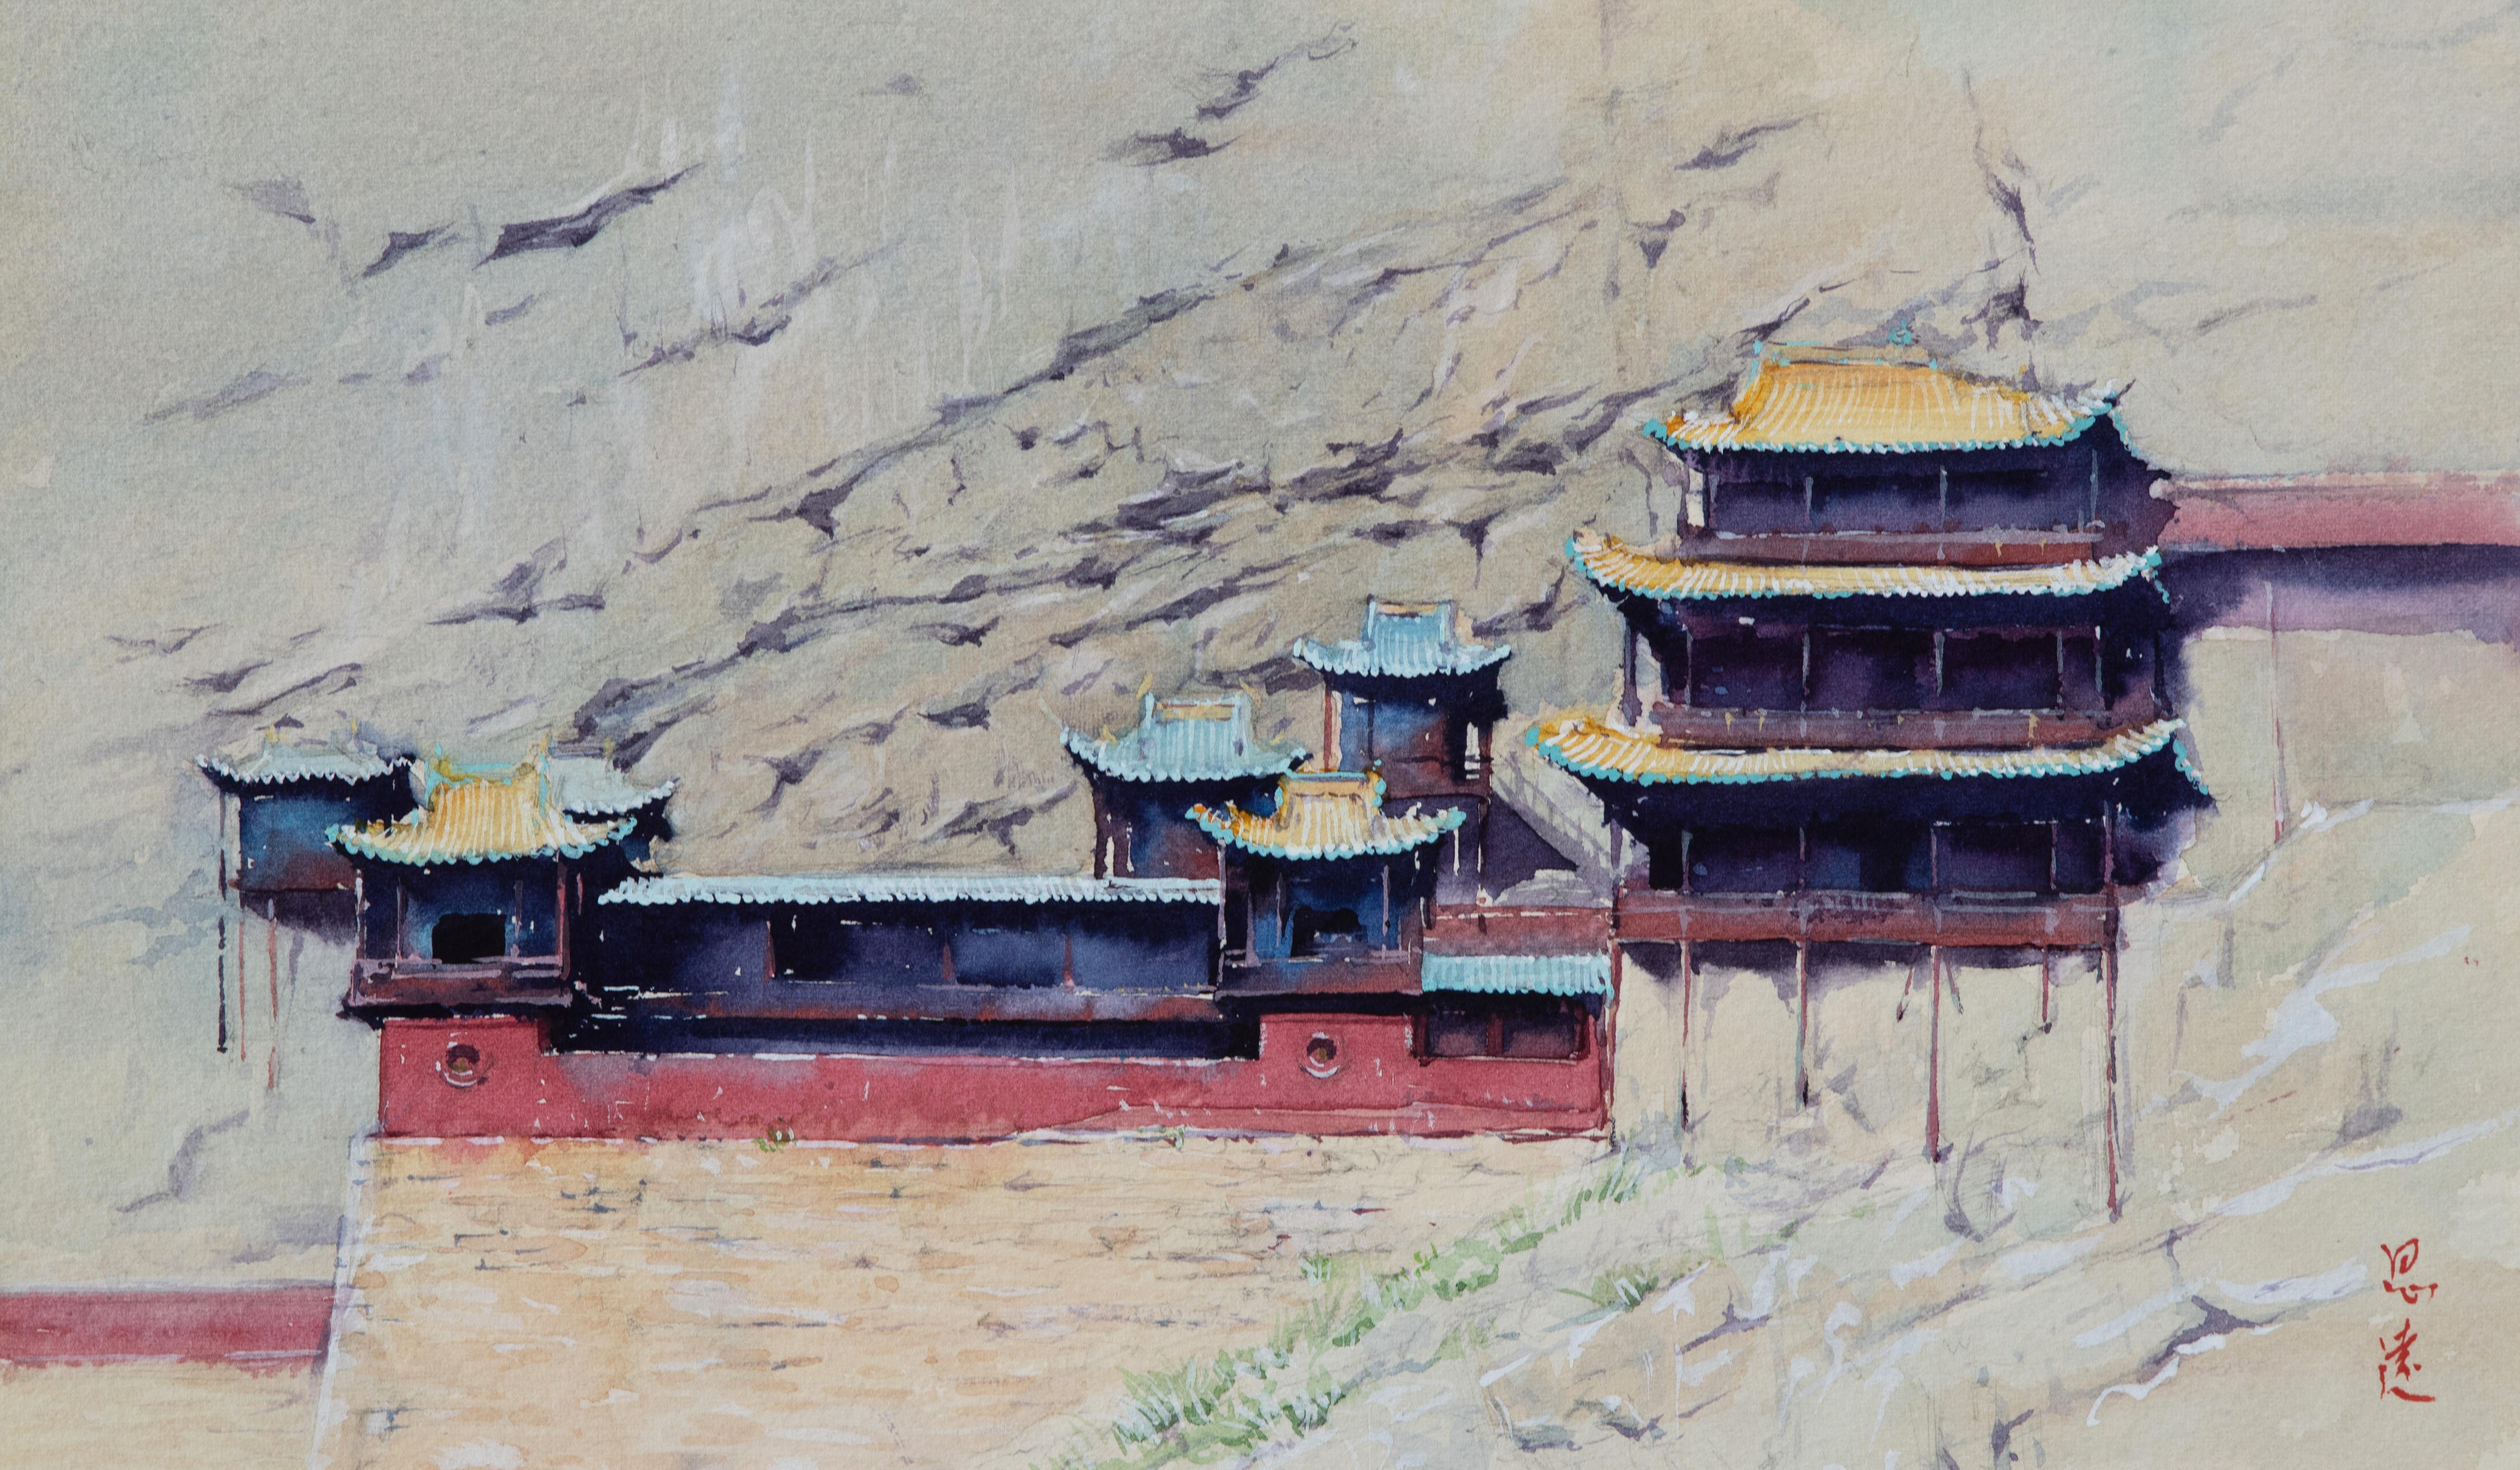 Watercolor Impressions of Chinese Architecture 15, Original Painting - Art by Siyuan Ma